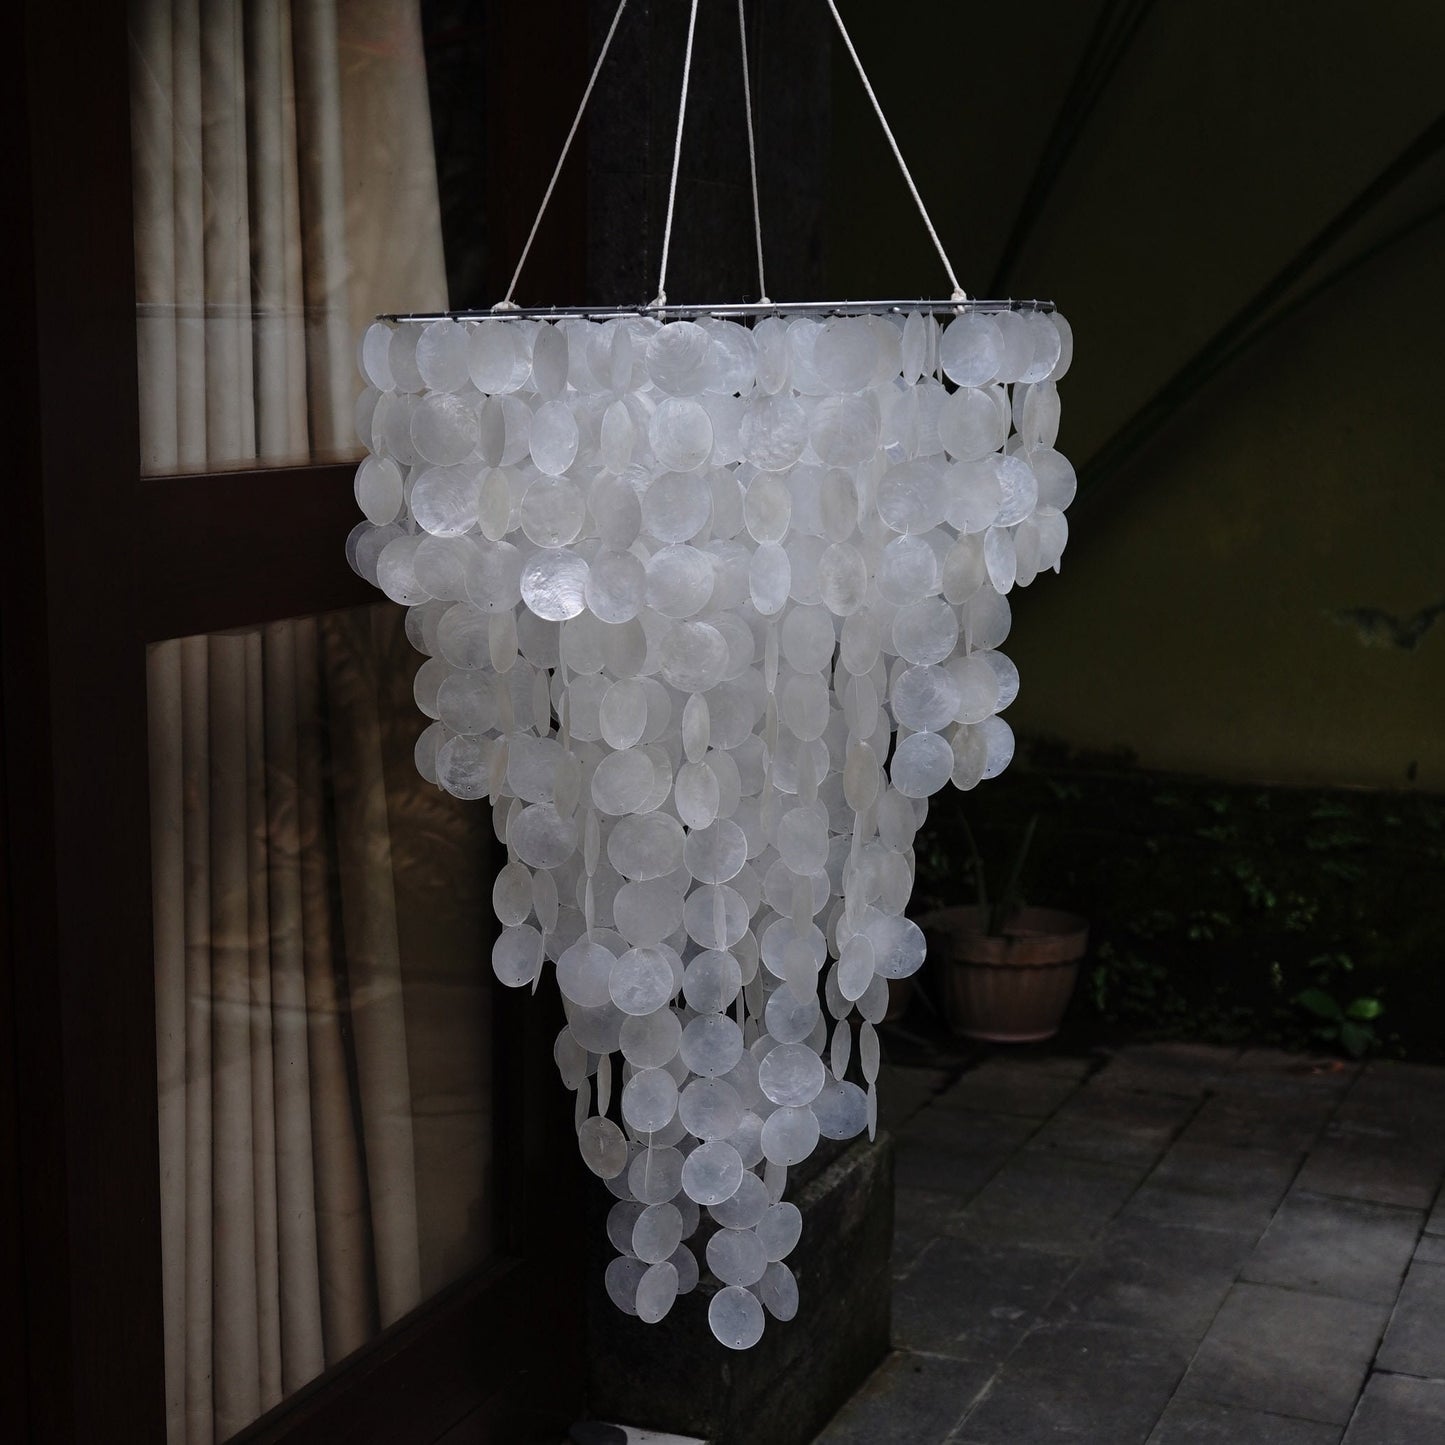 How to Make a DIY Hanging Capiz Shell Pendant Chandelier